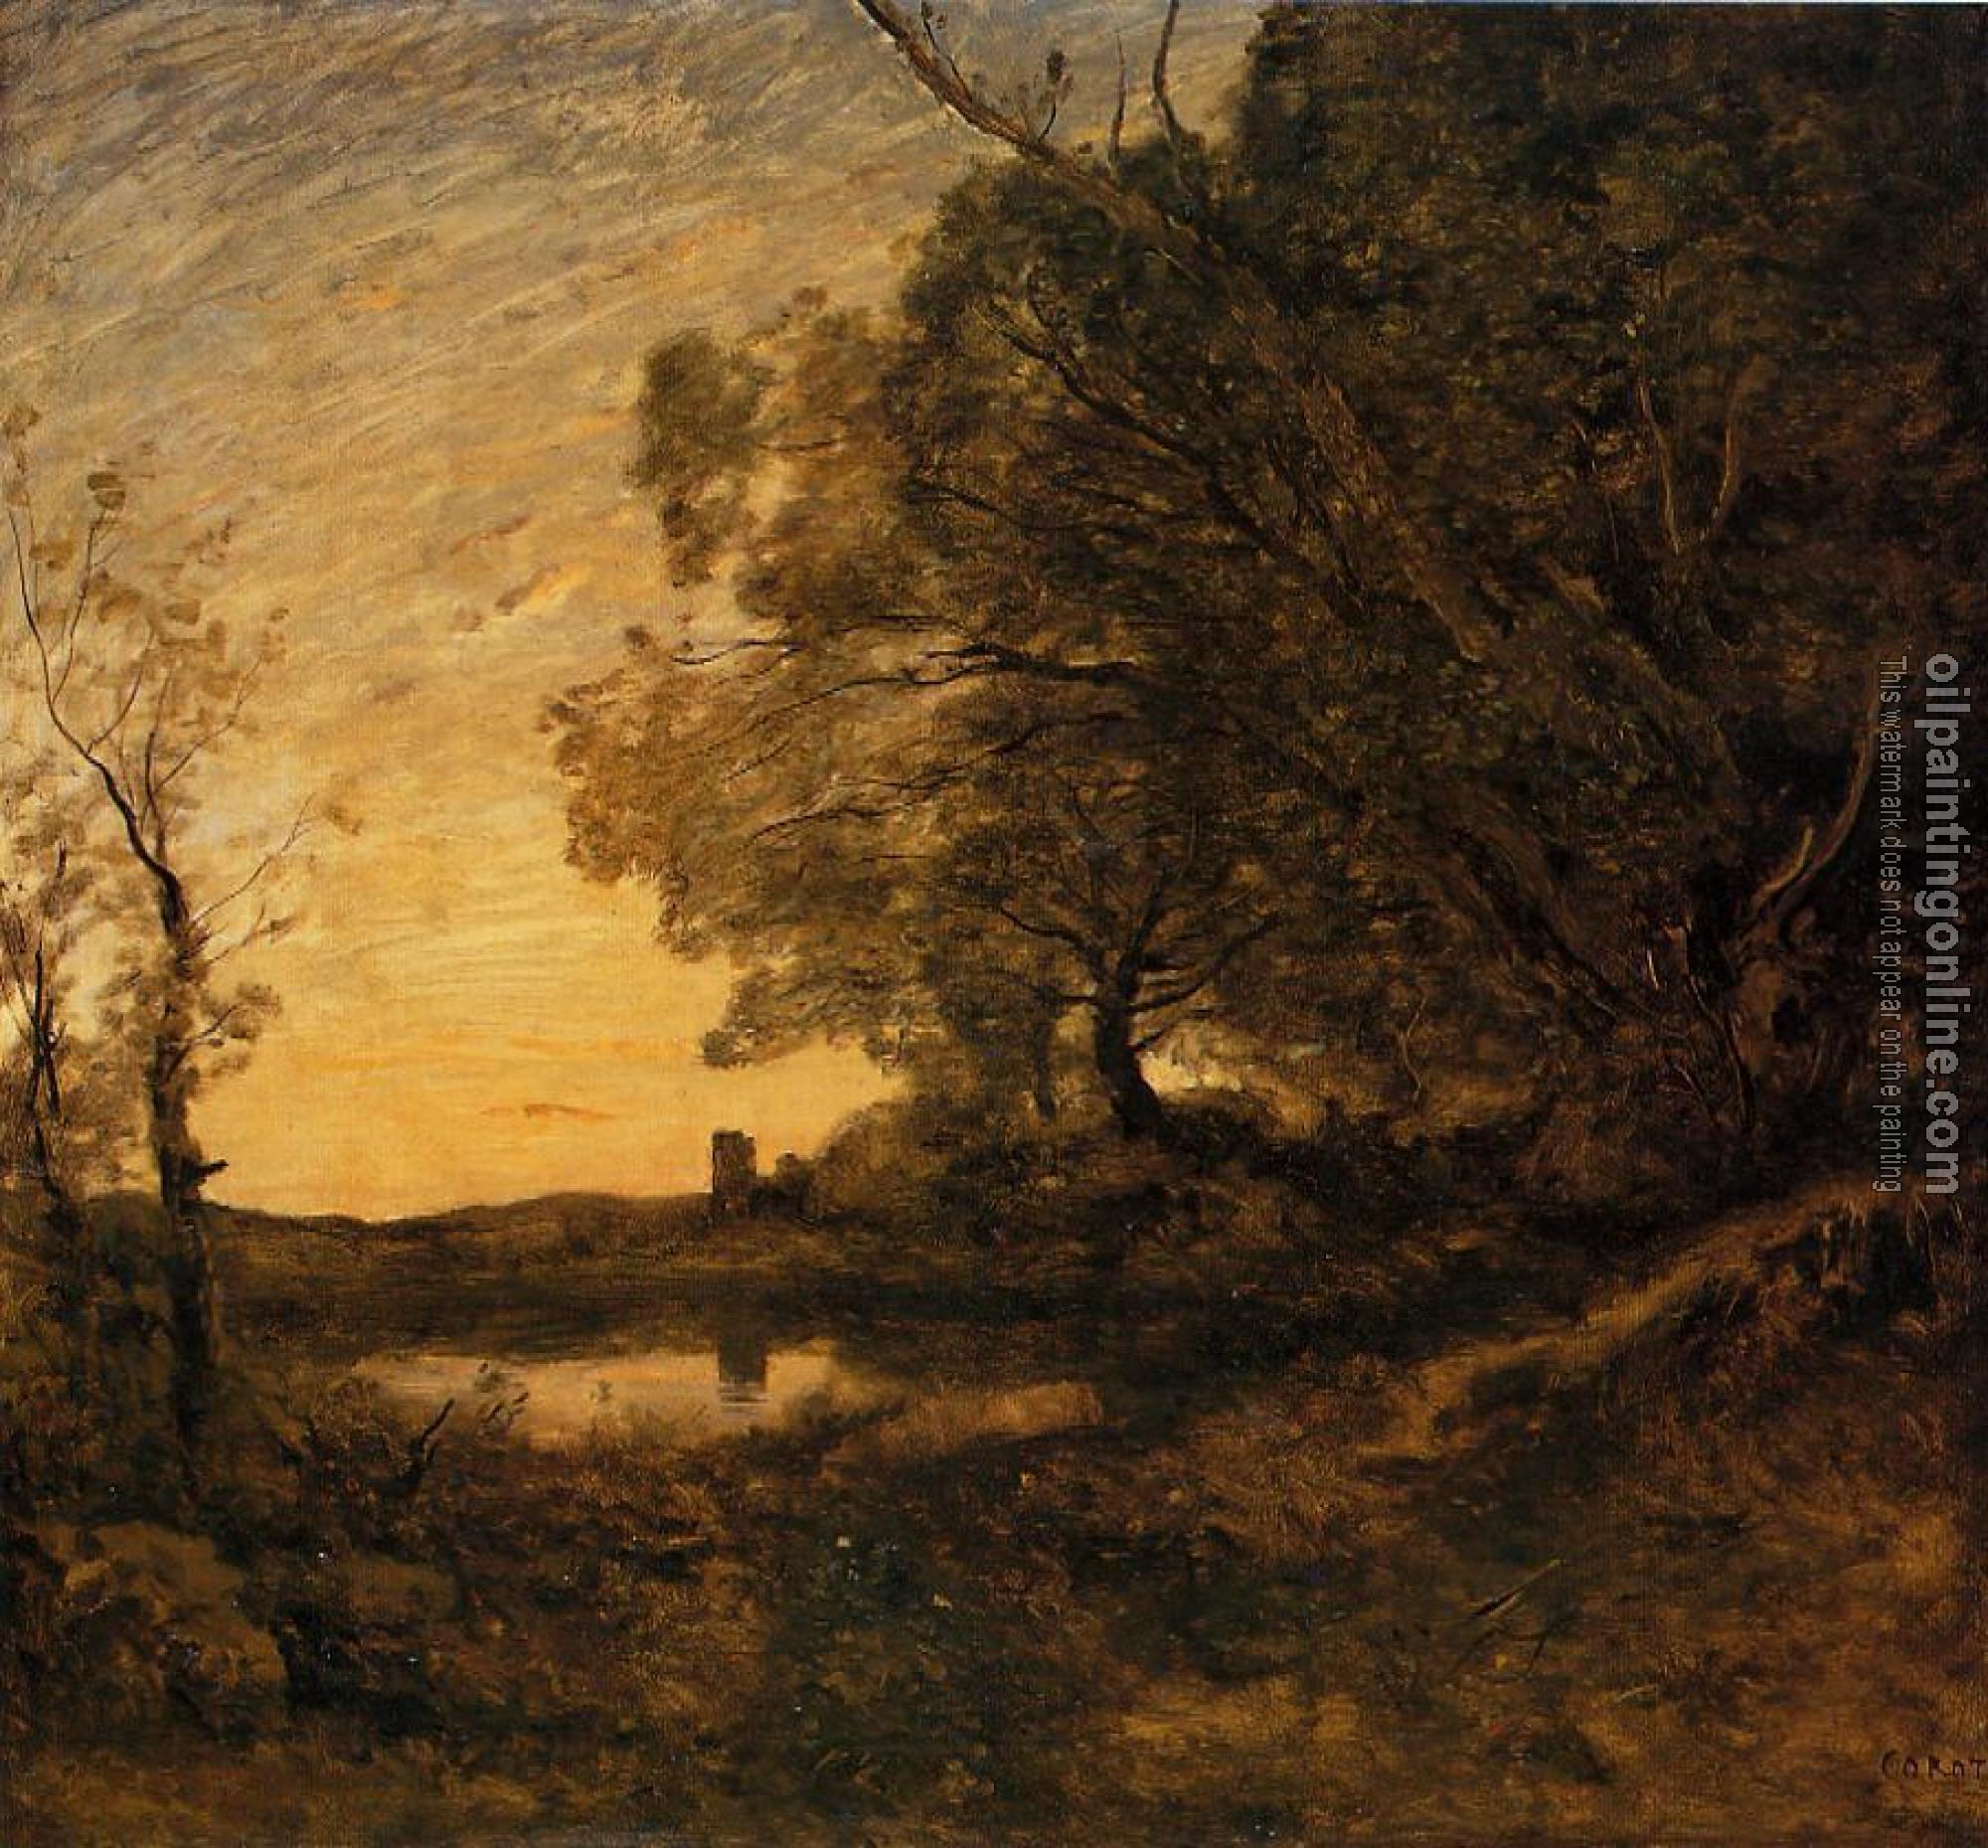 Corot, Jean-Baptiste-Camille - Evening - Distant Tower